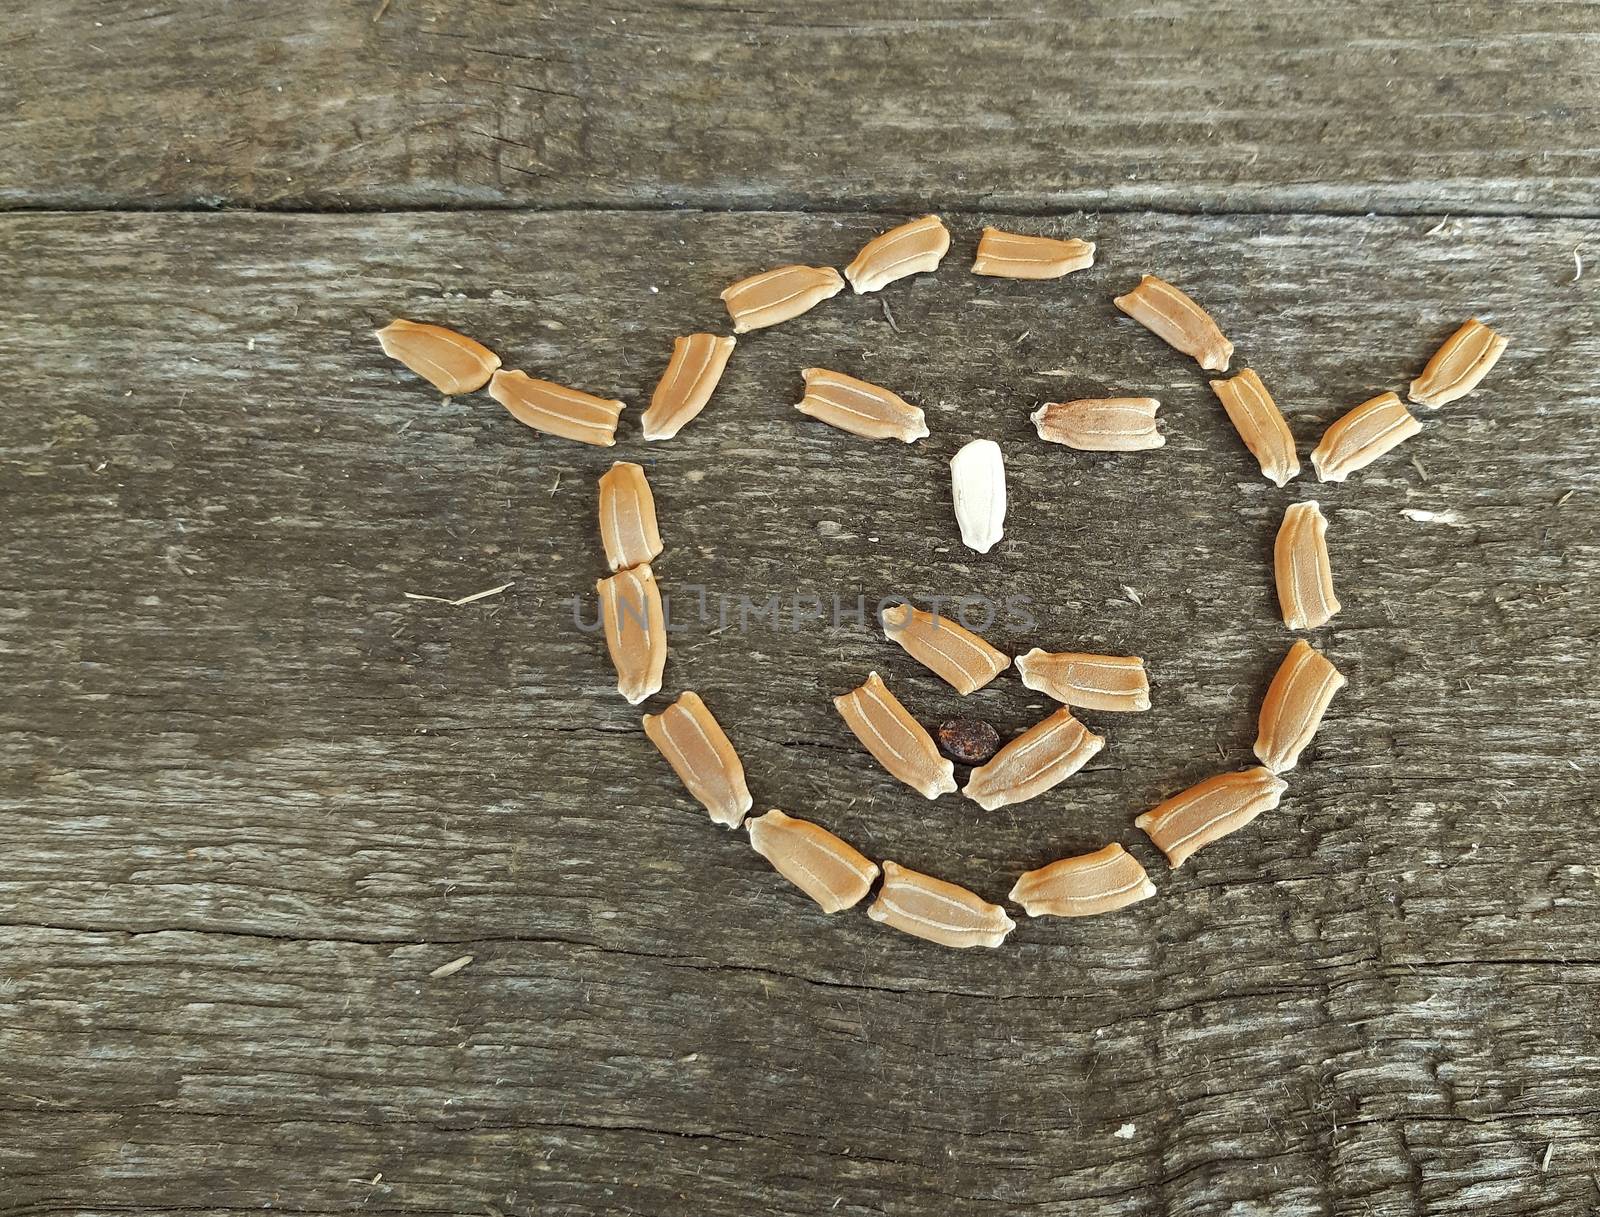 Seeds smiley emoticon shape on wooden bacground.